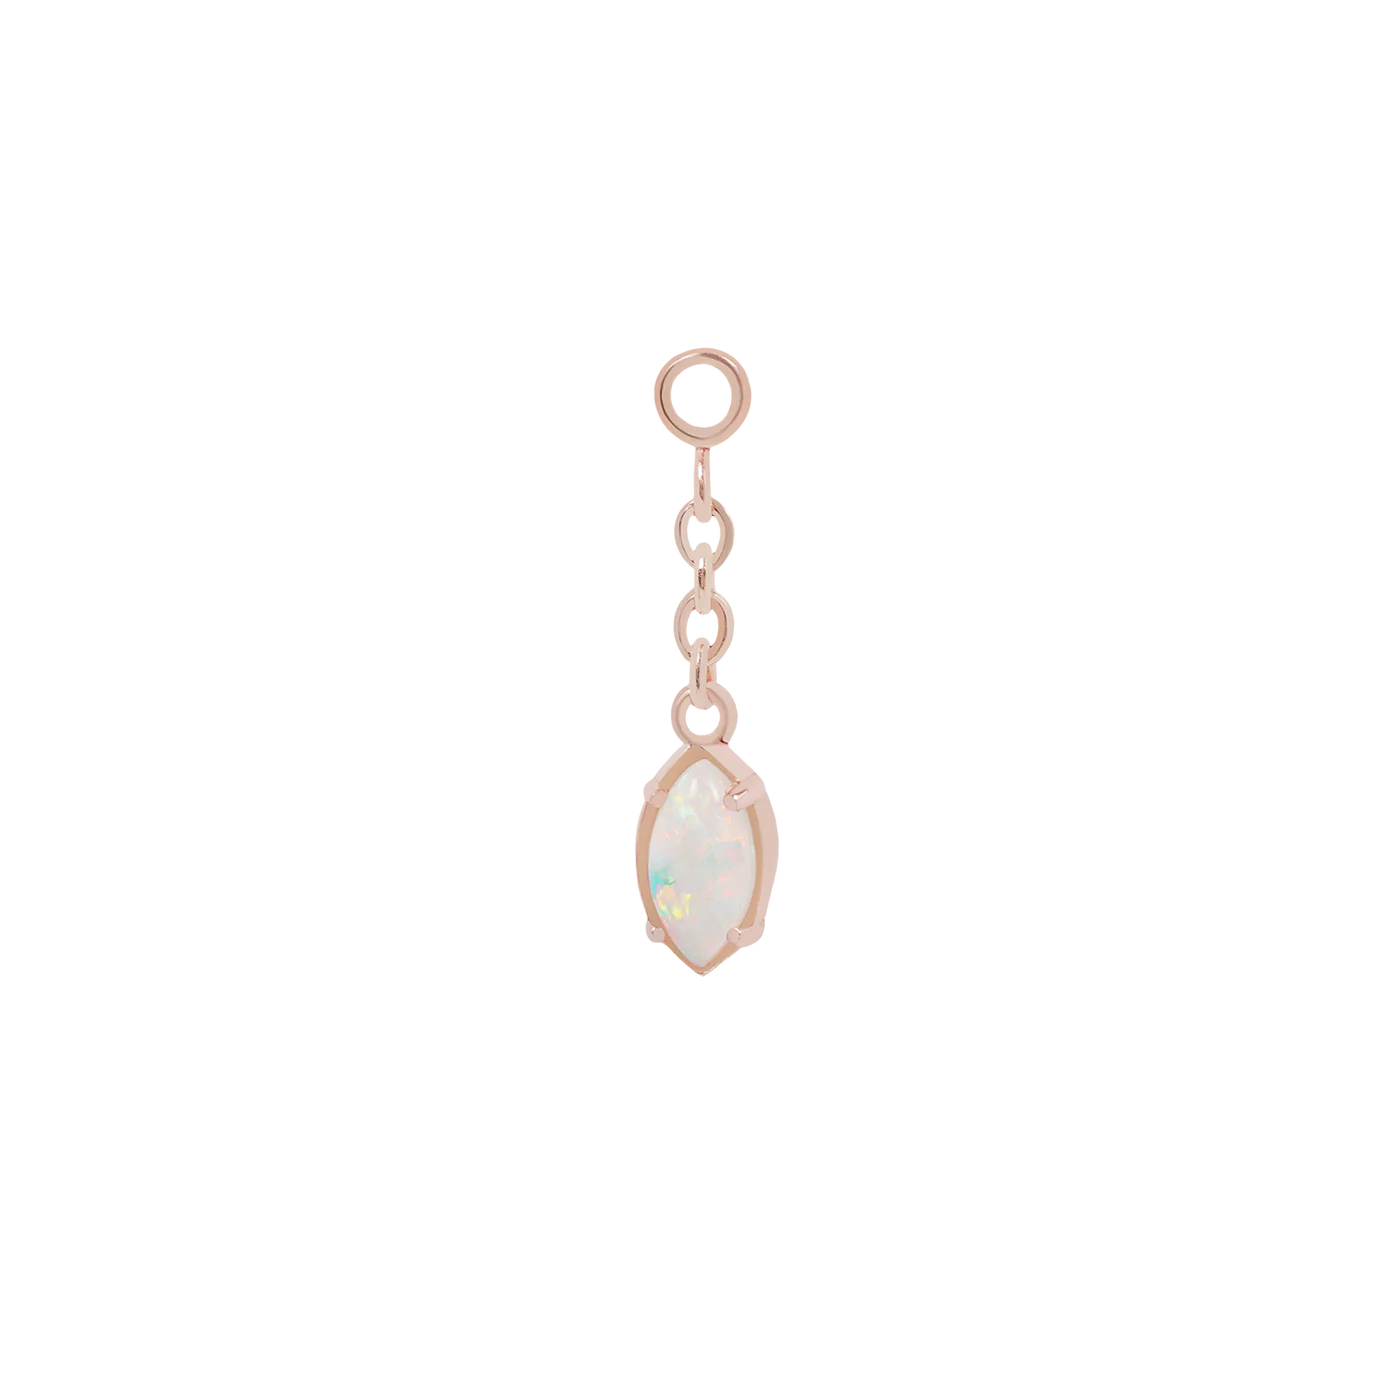 AfterCare Genuine Marquise Cut Opal Charm